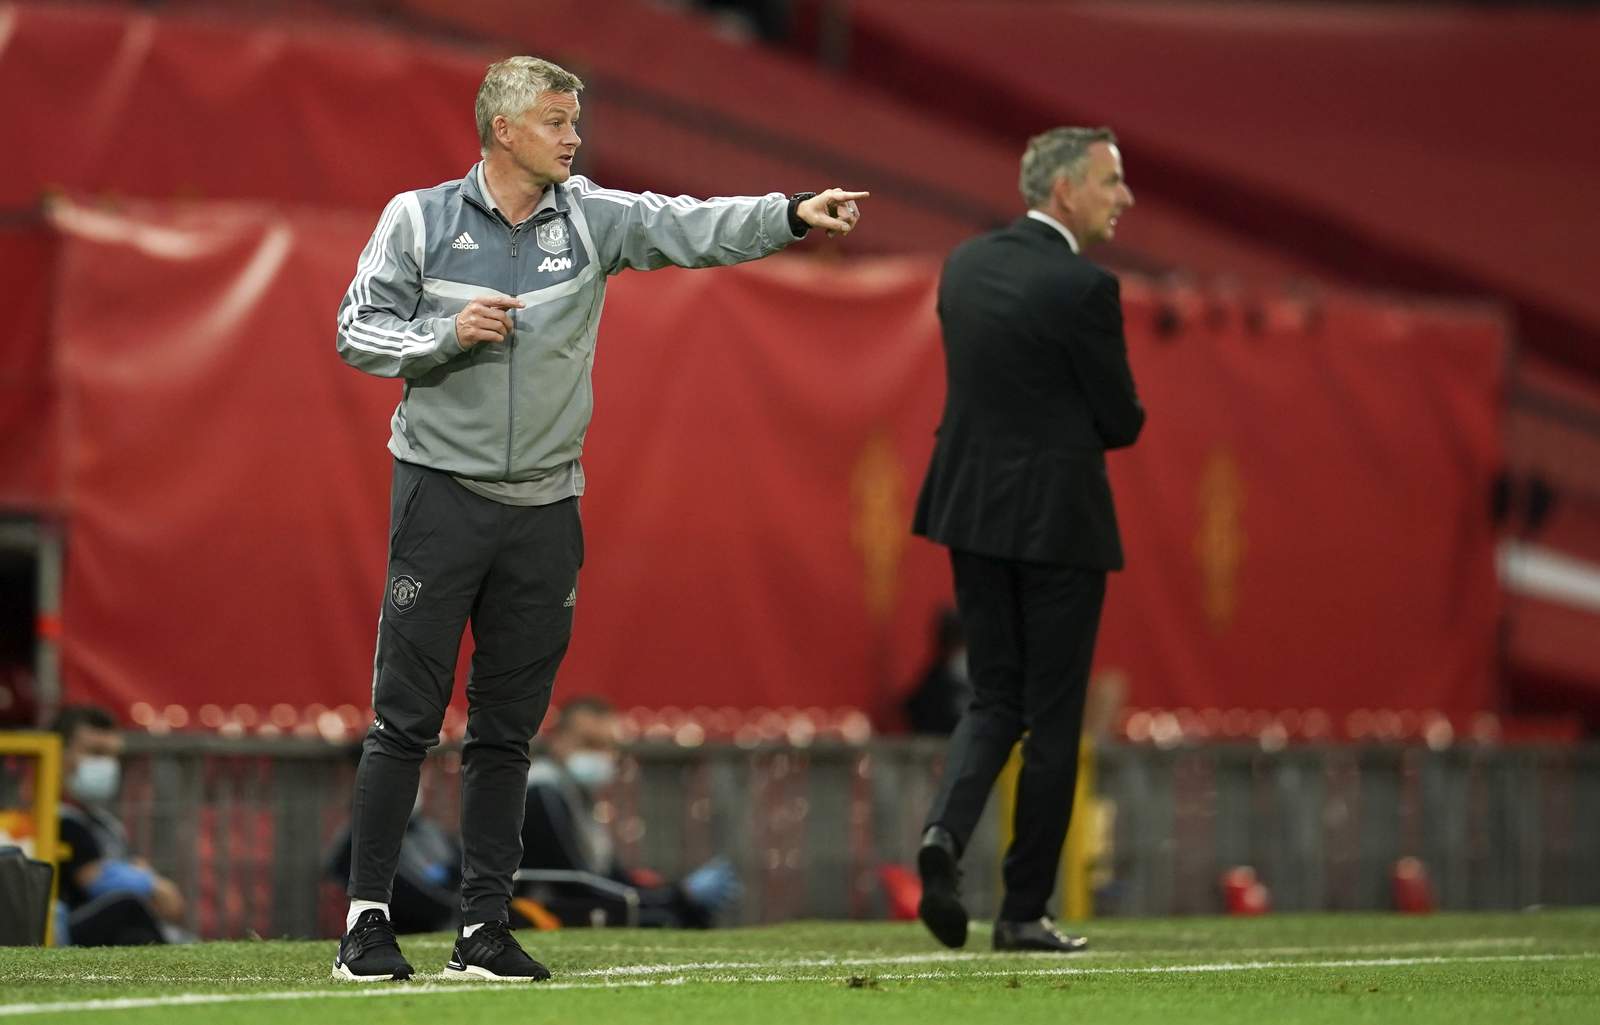 Man United's Solskjaer faces old teammate in Europa League